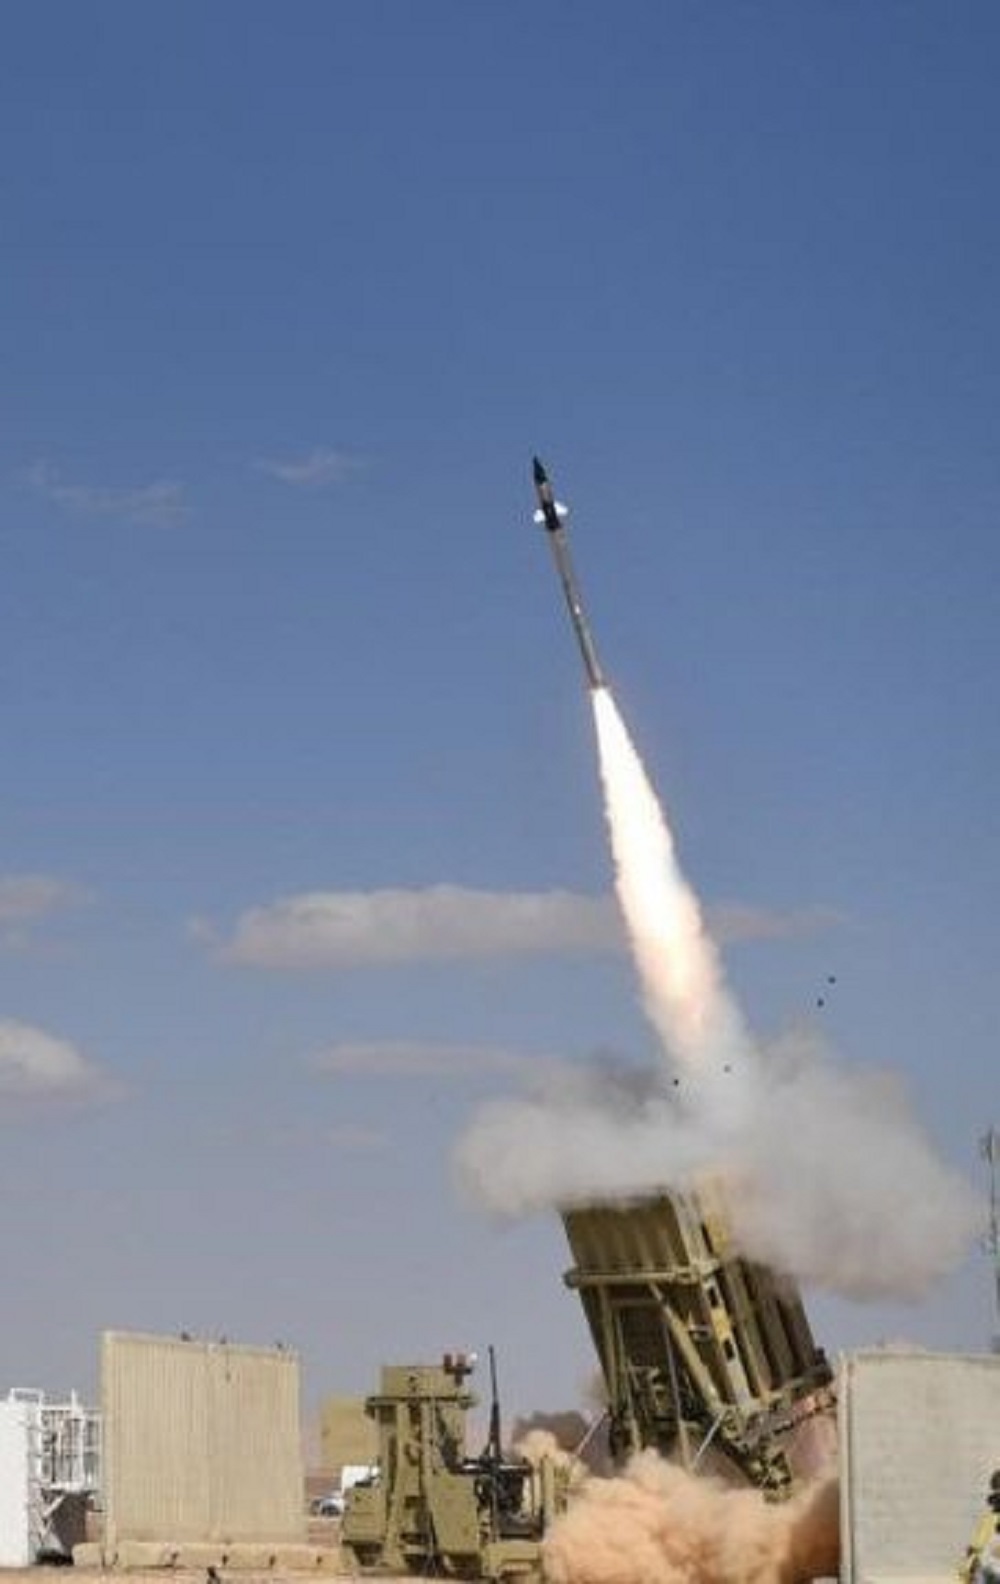 Israel Missile Defense Organization and Rafael Complete Successful Series of Tests of Iron Dome System